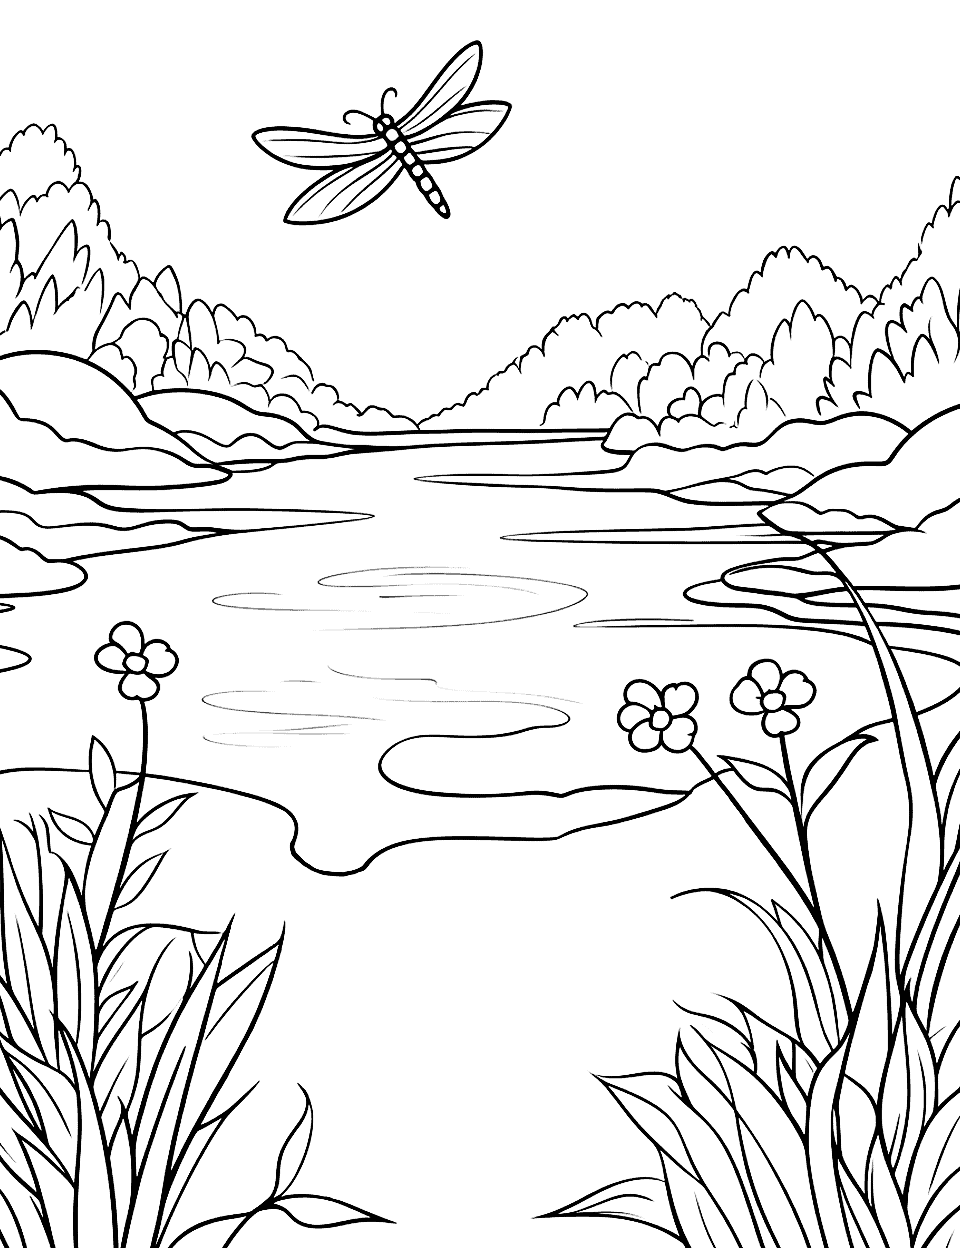 Dragonfly Over a Pond Coloring Page - A dragonfly flying over a pond with flowers.